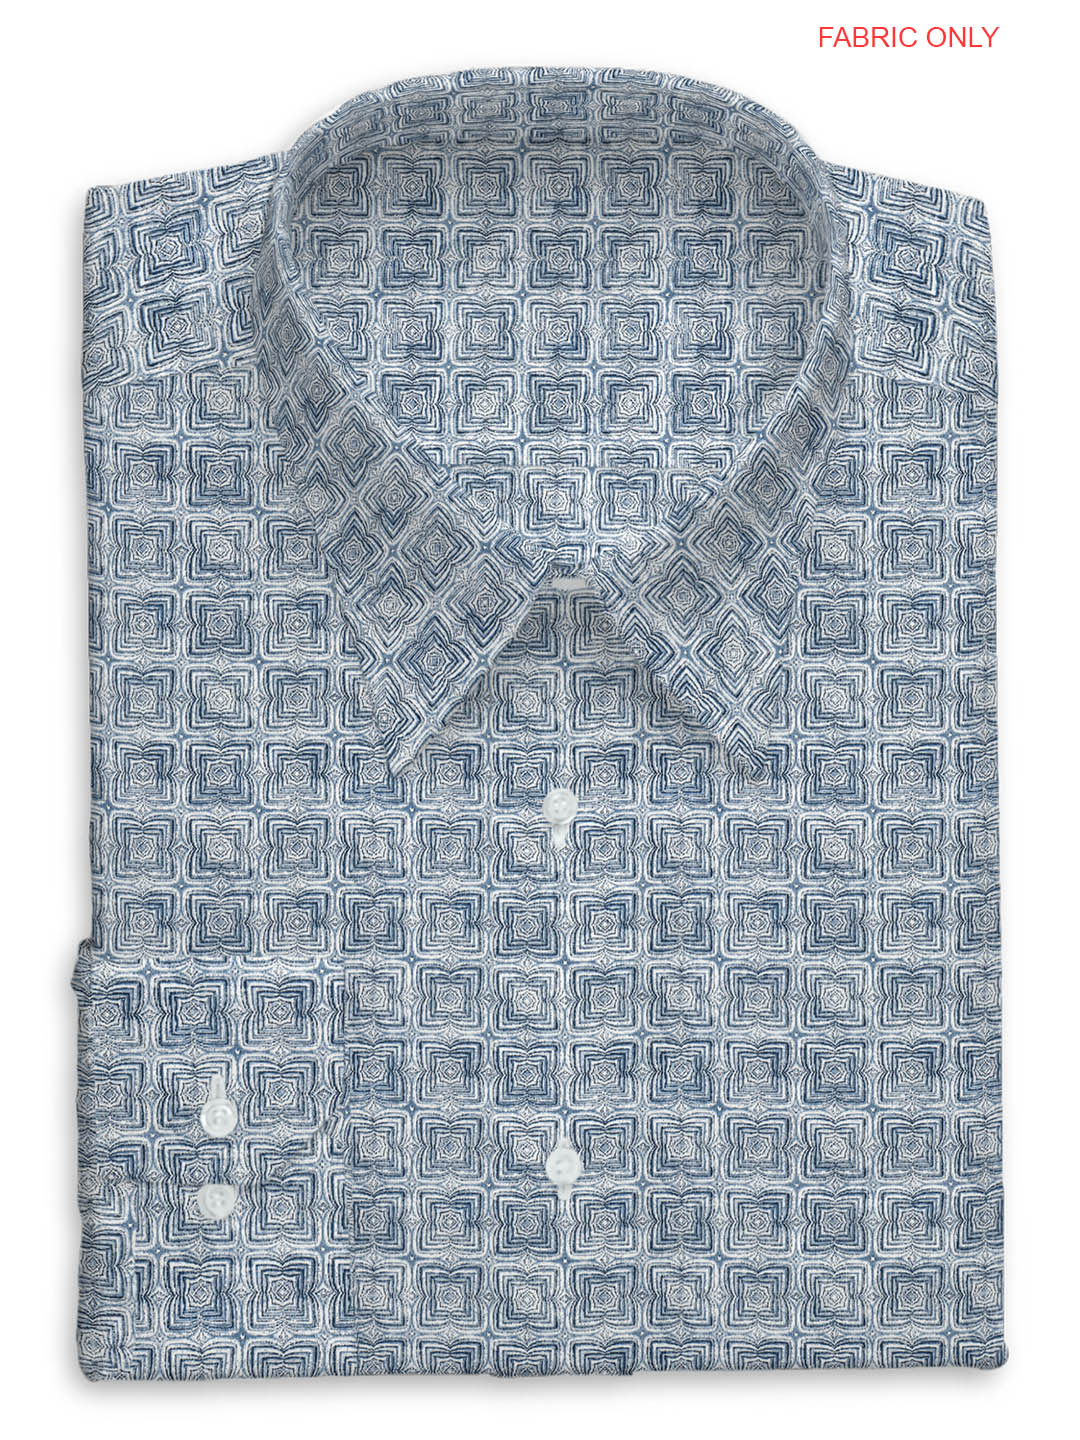 Cotton Navy Blue Box type Printed All-over Print Shirt Fabric OSLO